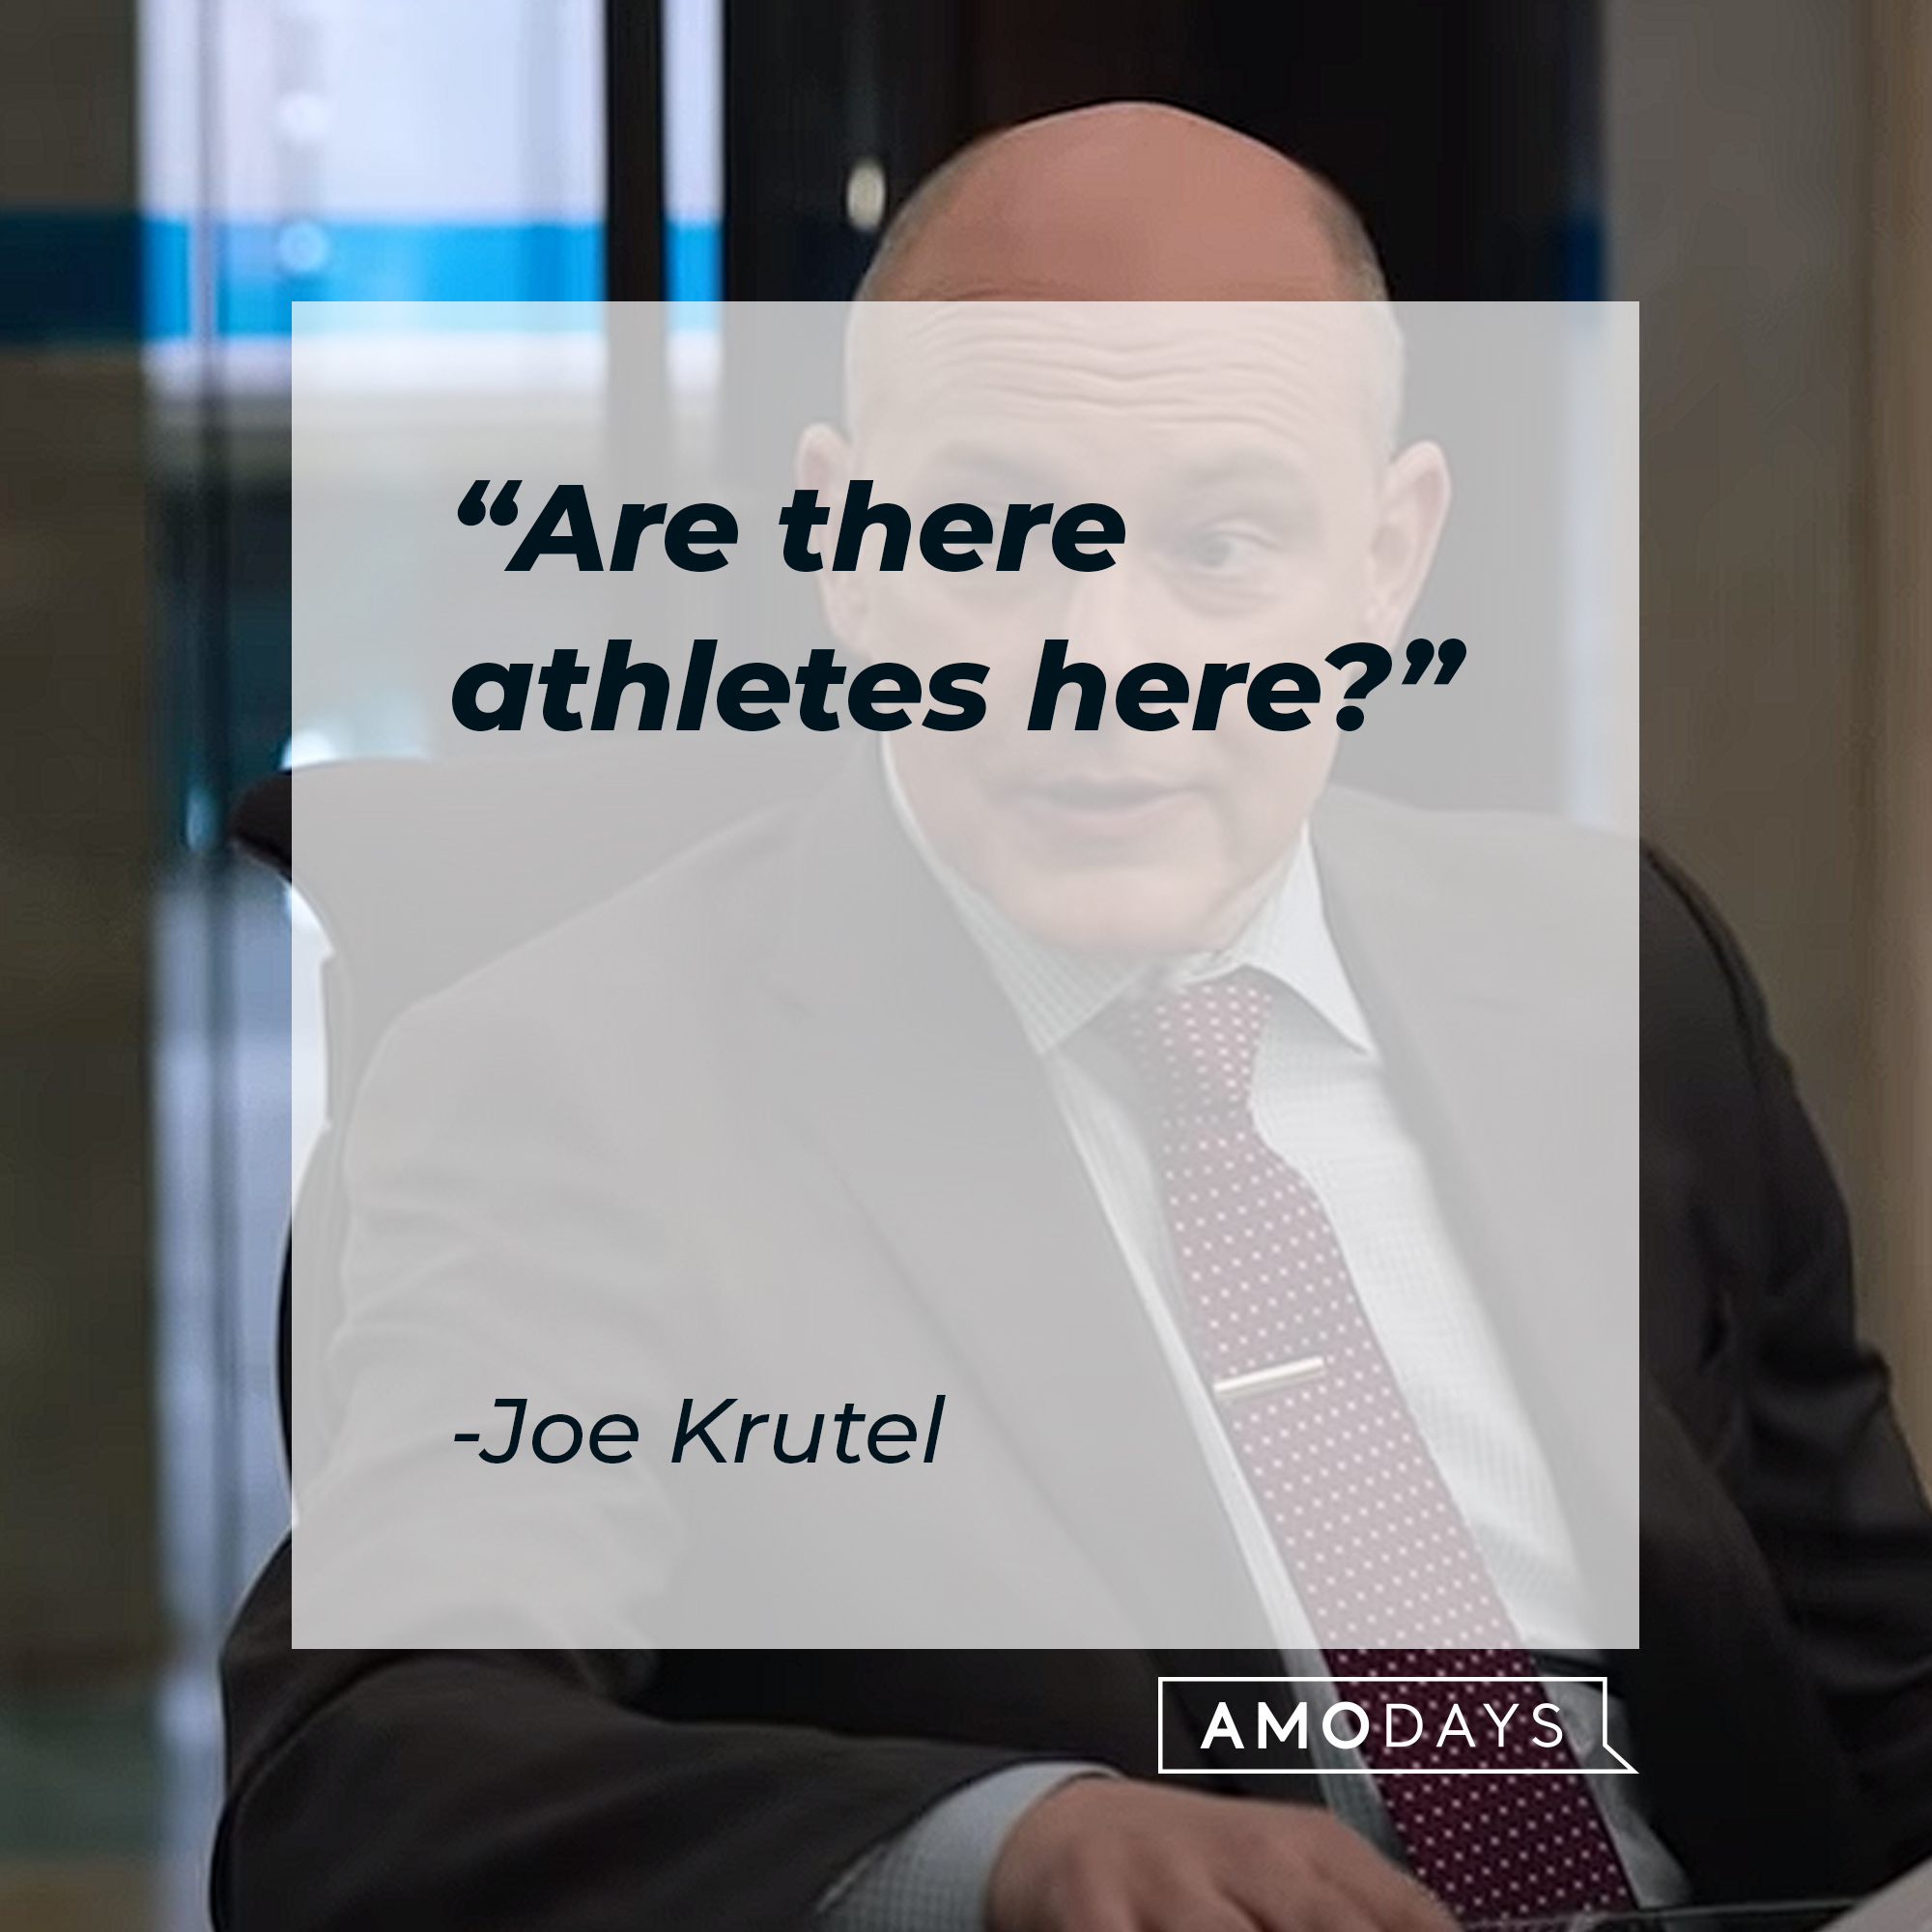 Joe Krutell, with his quote: “Are there athletes here?” | Source: youtube.com/HBO